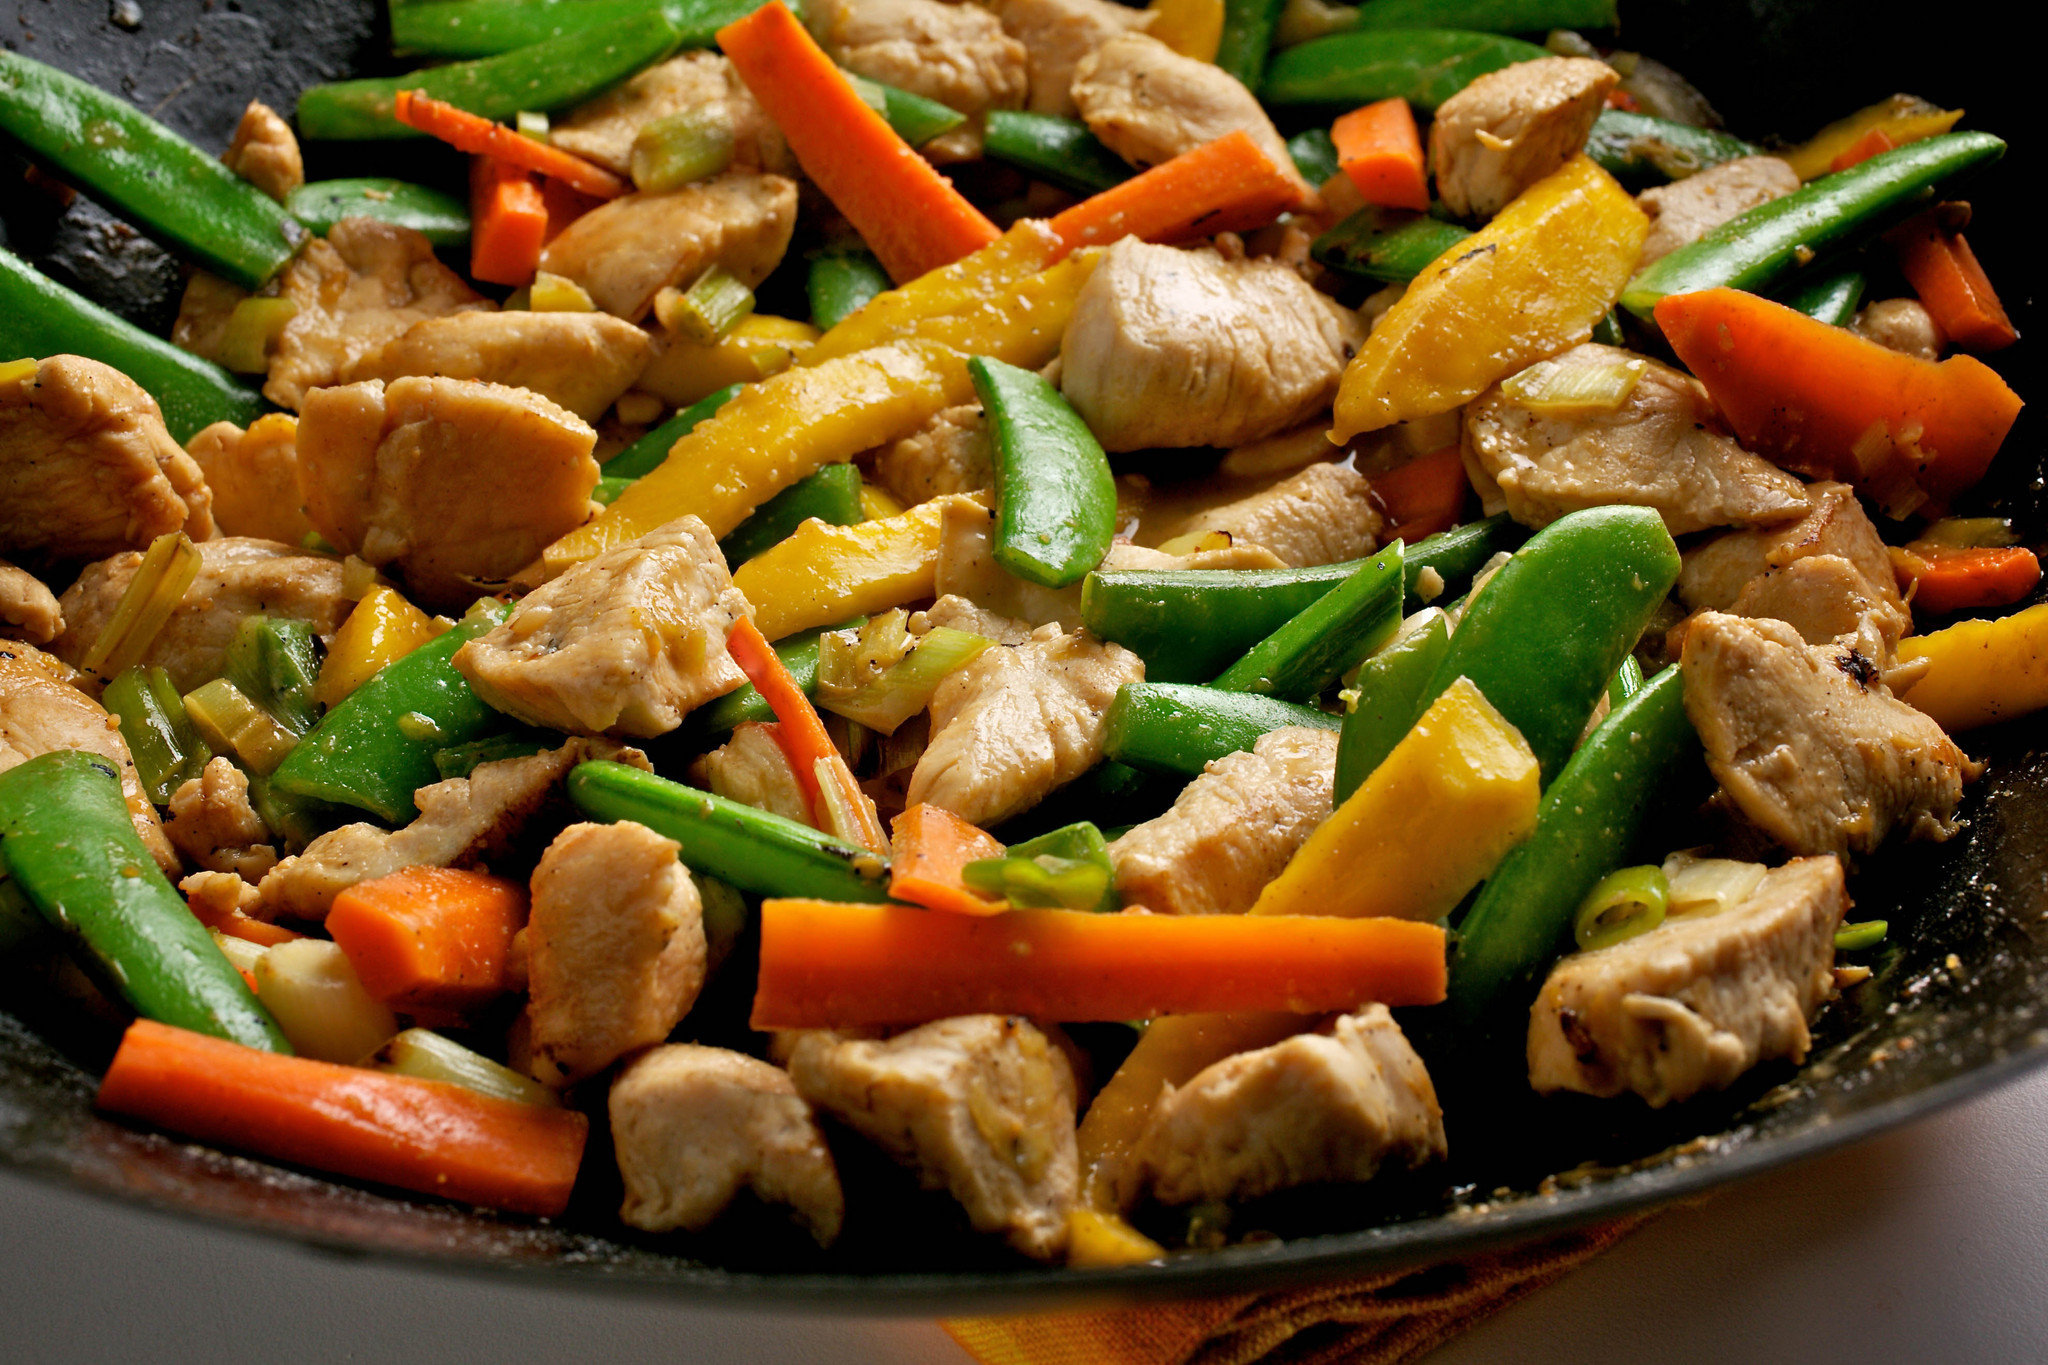 Images of Chicken Stir-Fry | 2048x1365